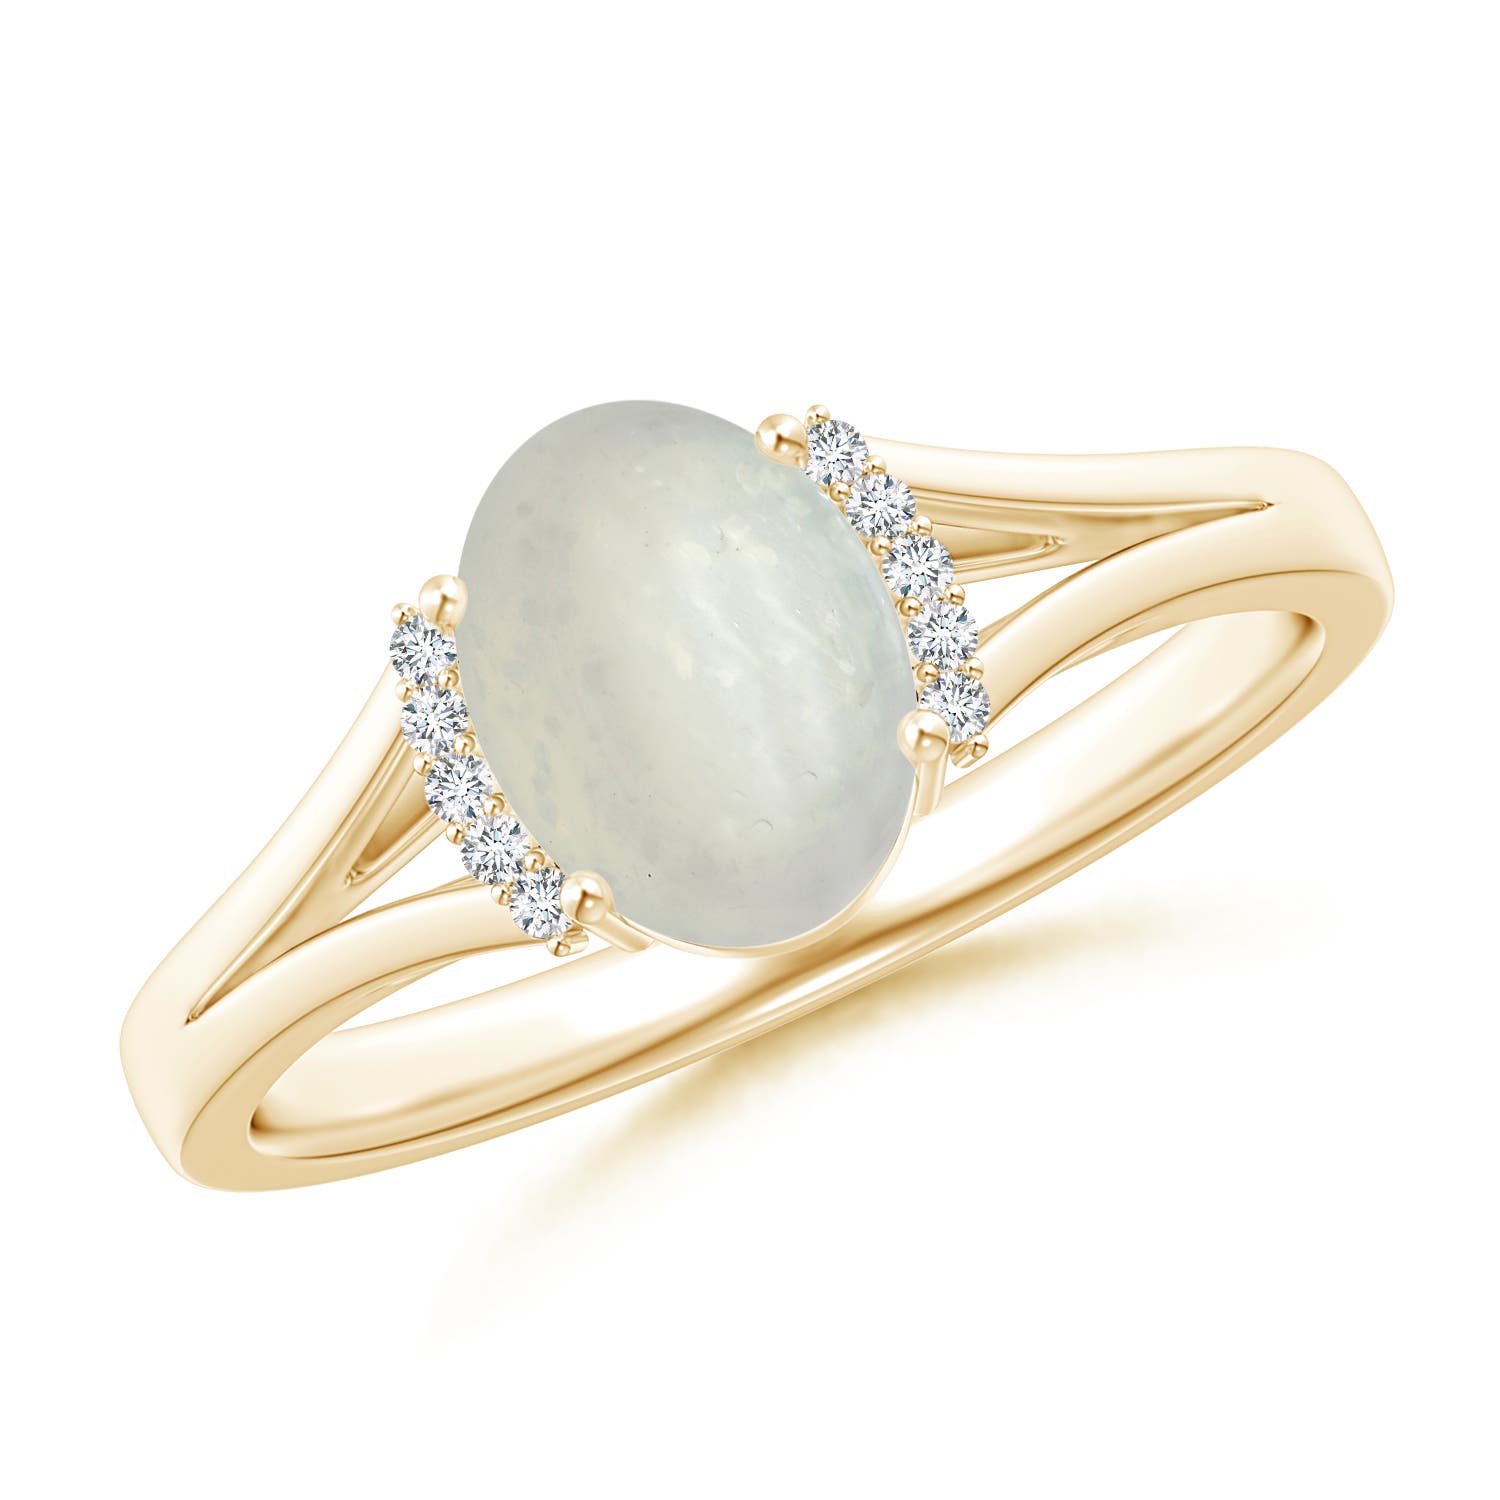 A - Moonstone / 1.15 CT / 14 KT Yellow Gold